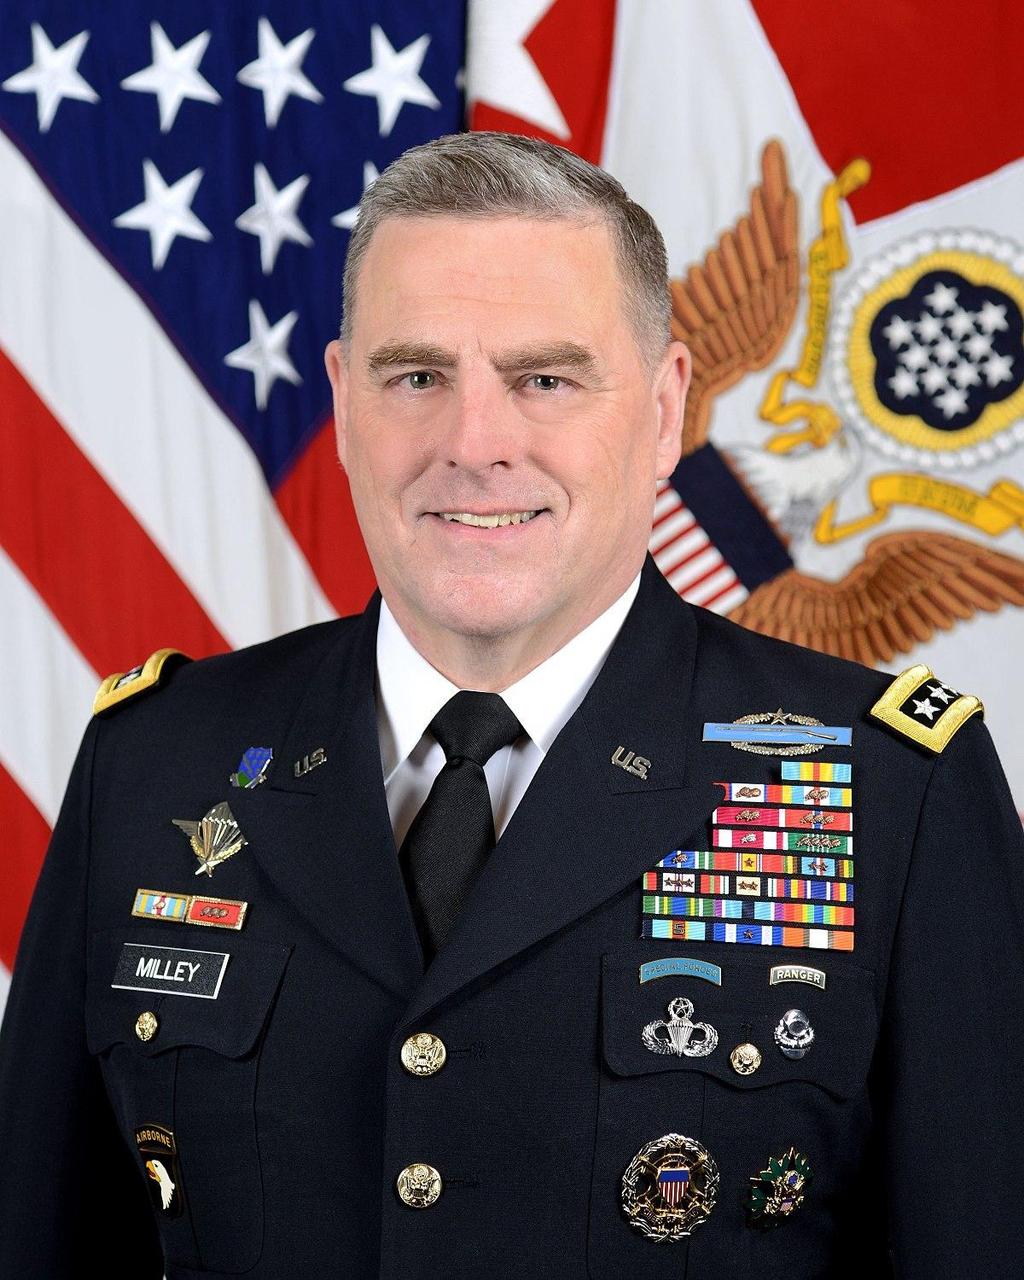 The Army's Chief of